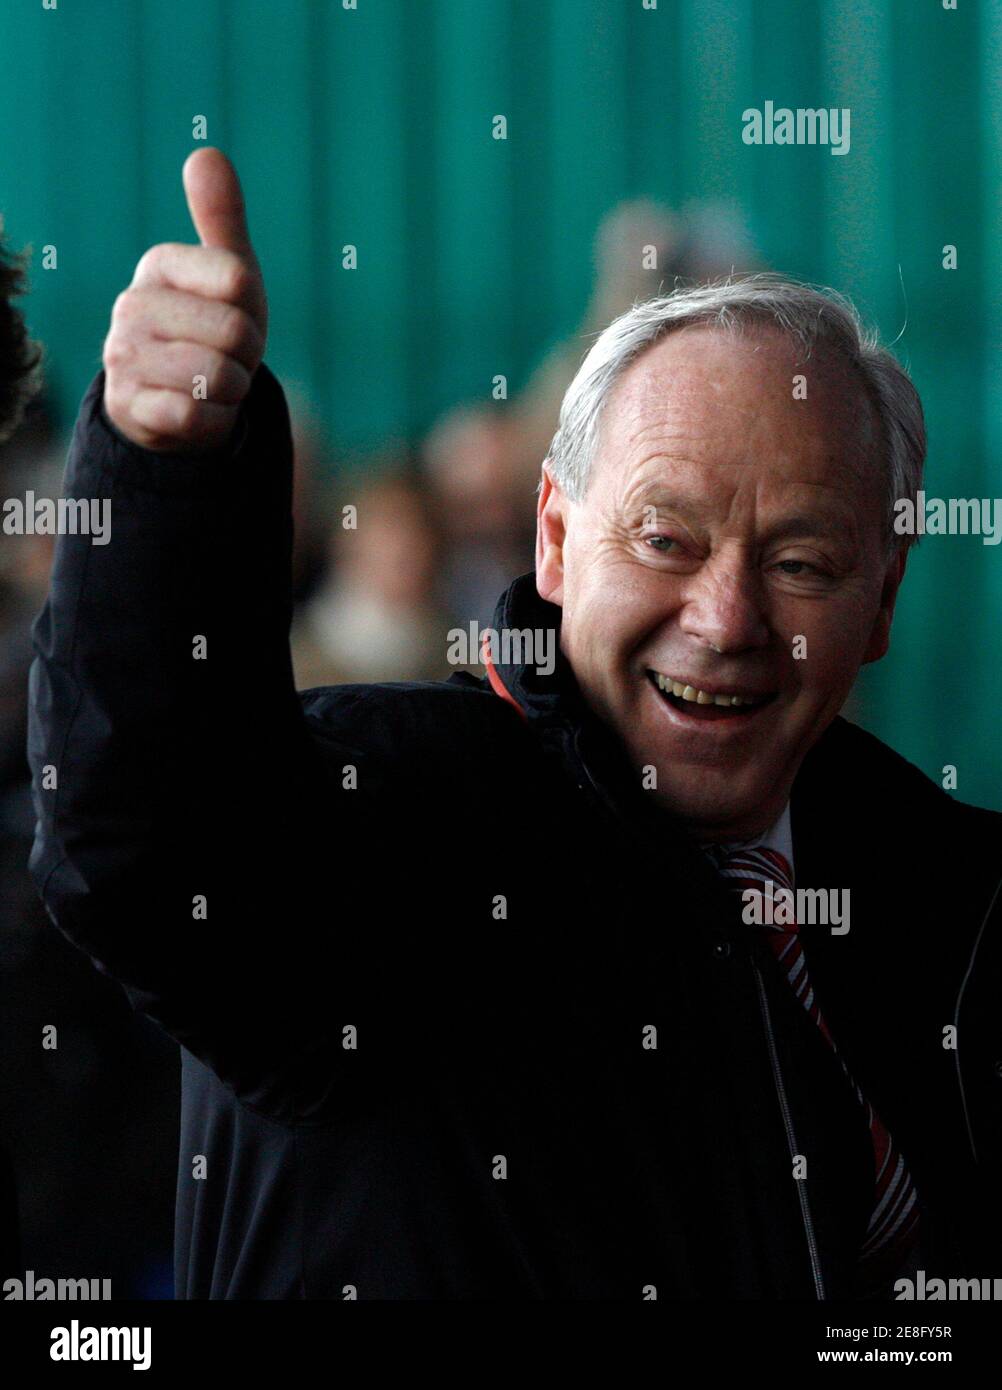 Switzerland's national soccer team coach Jakob Kuhn arrives for the UEFA Euro 2008 soccer final draw in Lucerne December 2, 2007. (EURO 2008 PREVIEW)  REUTERS/Pascal Lauener (SWITZERLAND) Stock Photo